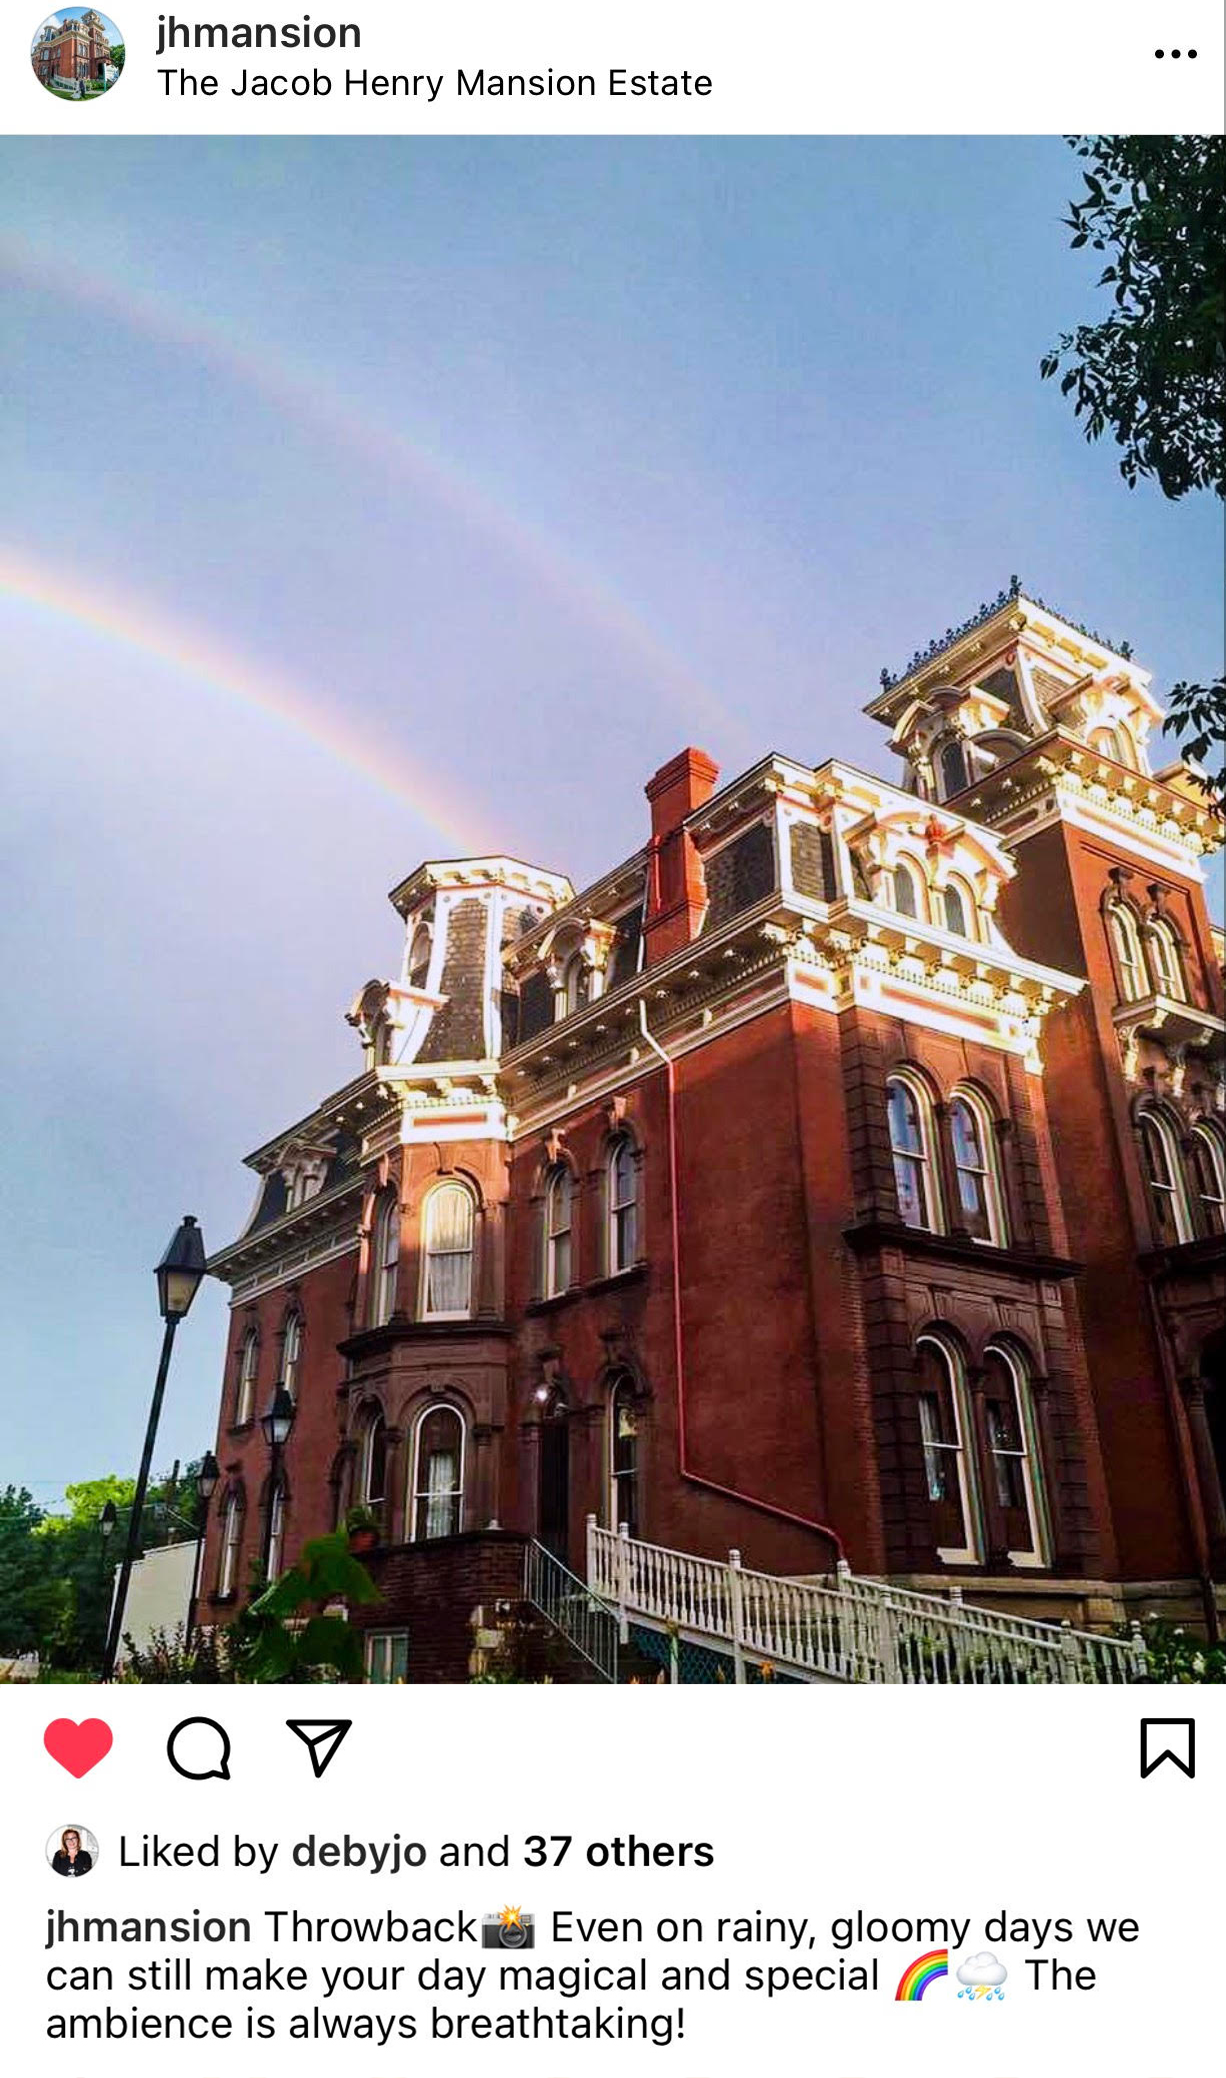 jacob henry mansion with a rainbow